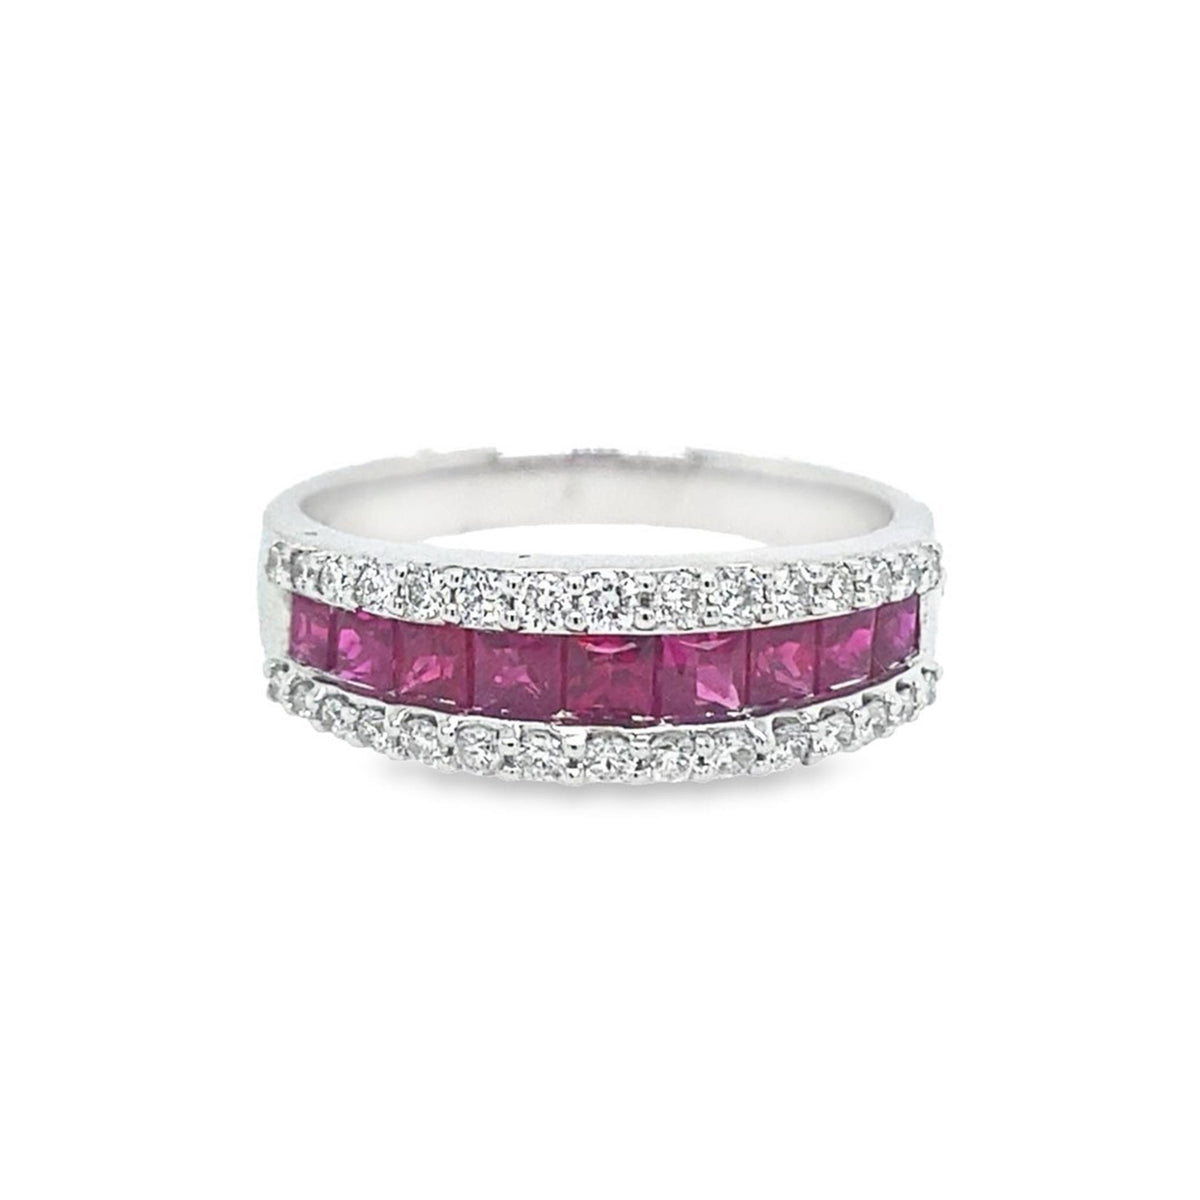 18Kt White Gold Classic Gemstone Ring With 0.87ct Rubies